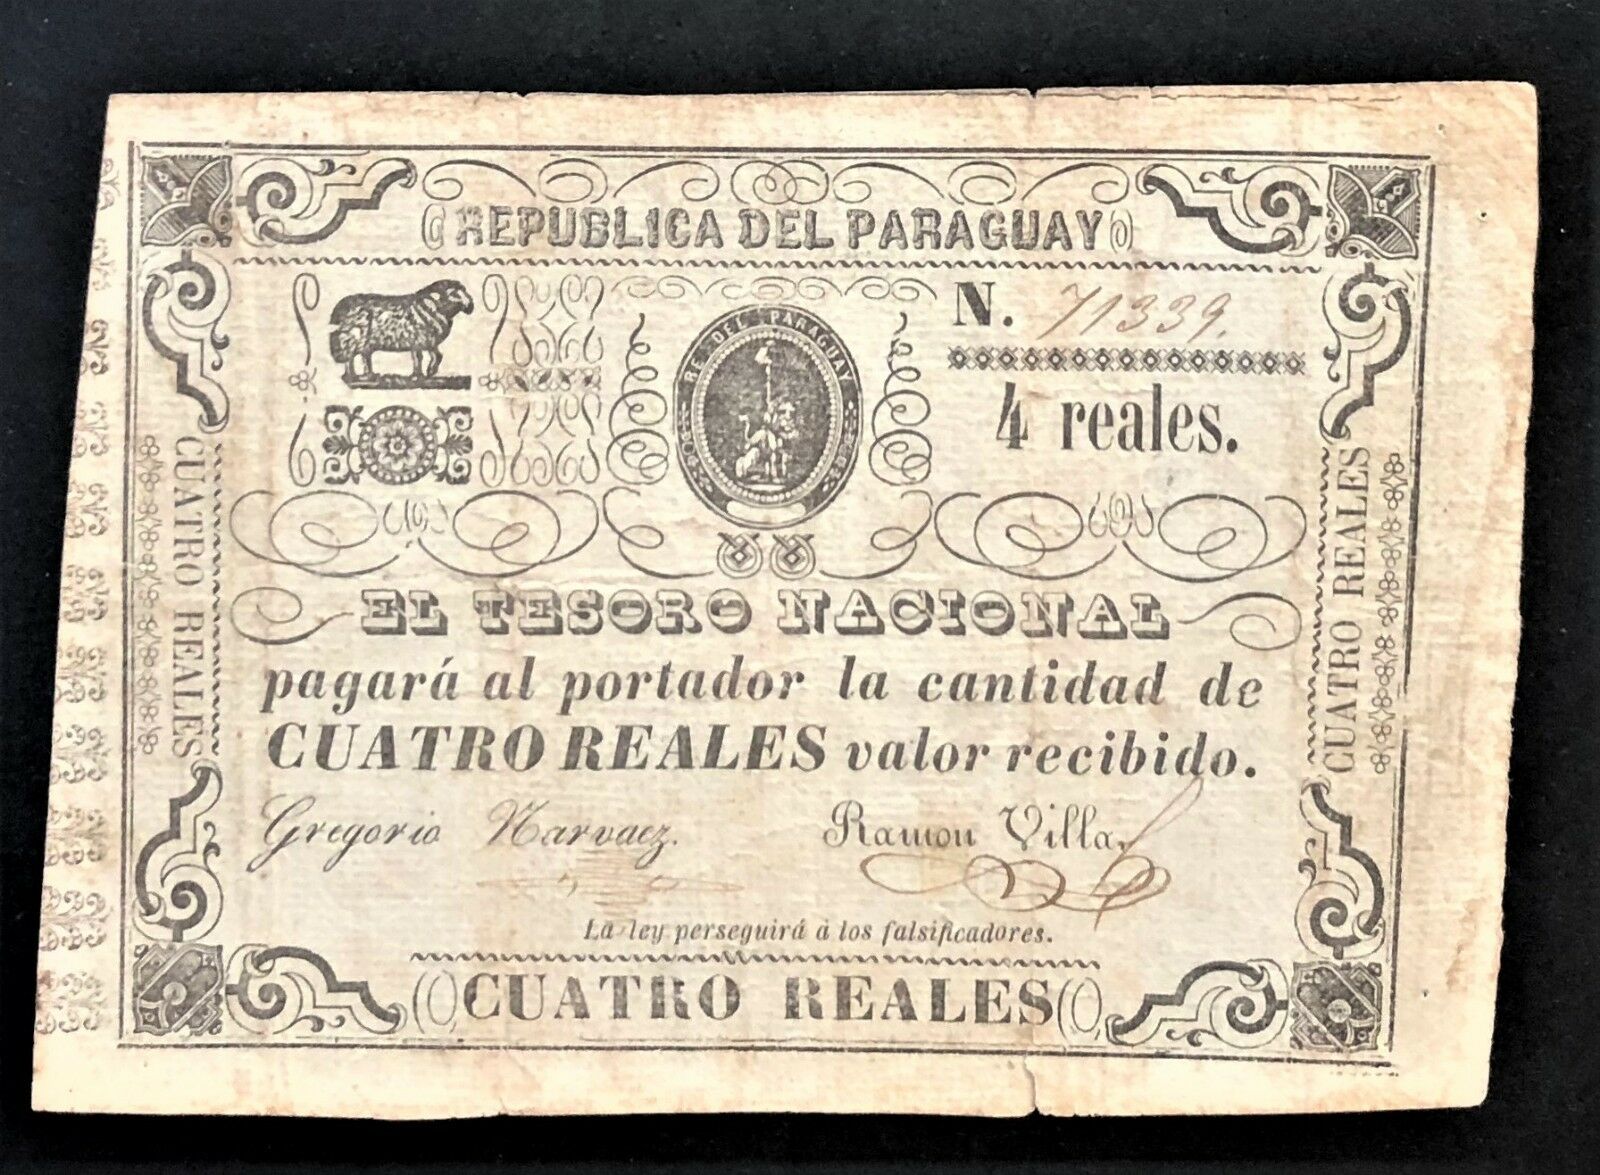 PARAGUAY 4 REALES (RAREST VALUE) of 1865 (WAR of the TRIPLE ALLIANCE) Pick # 20